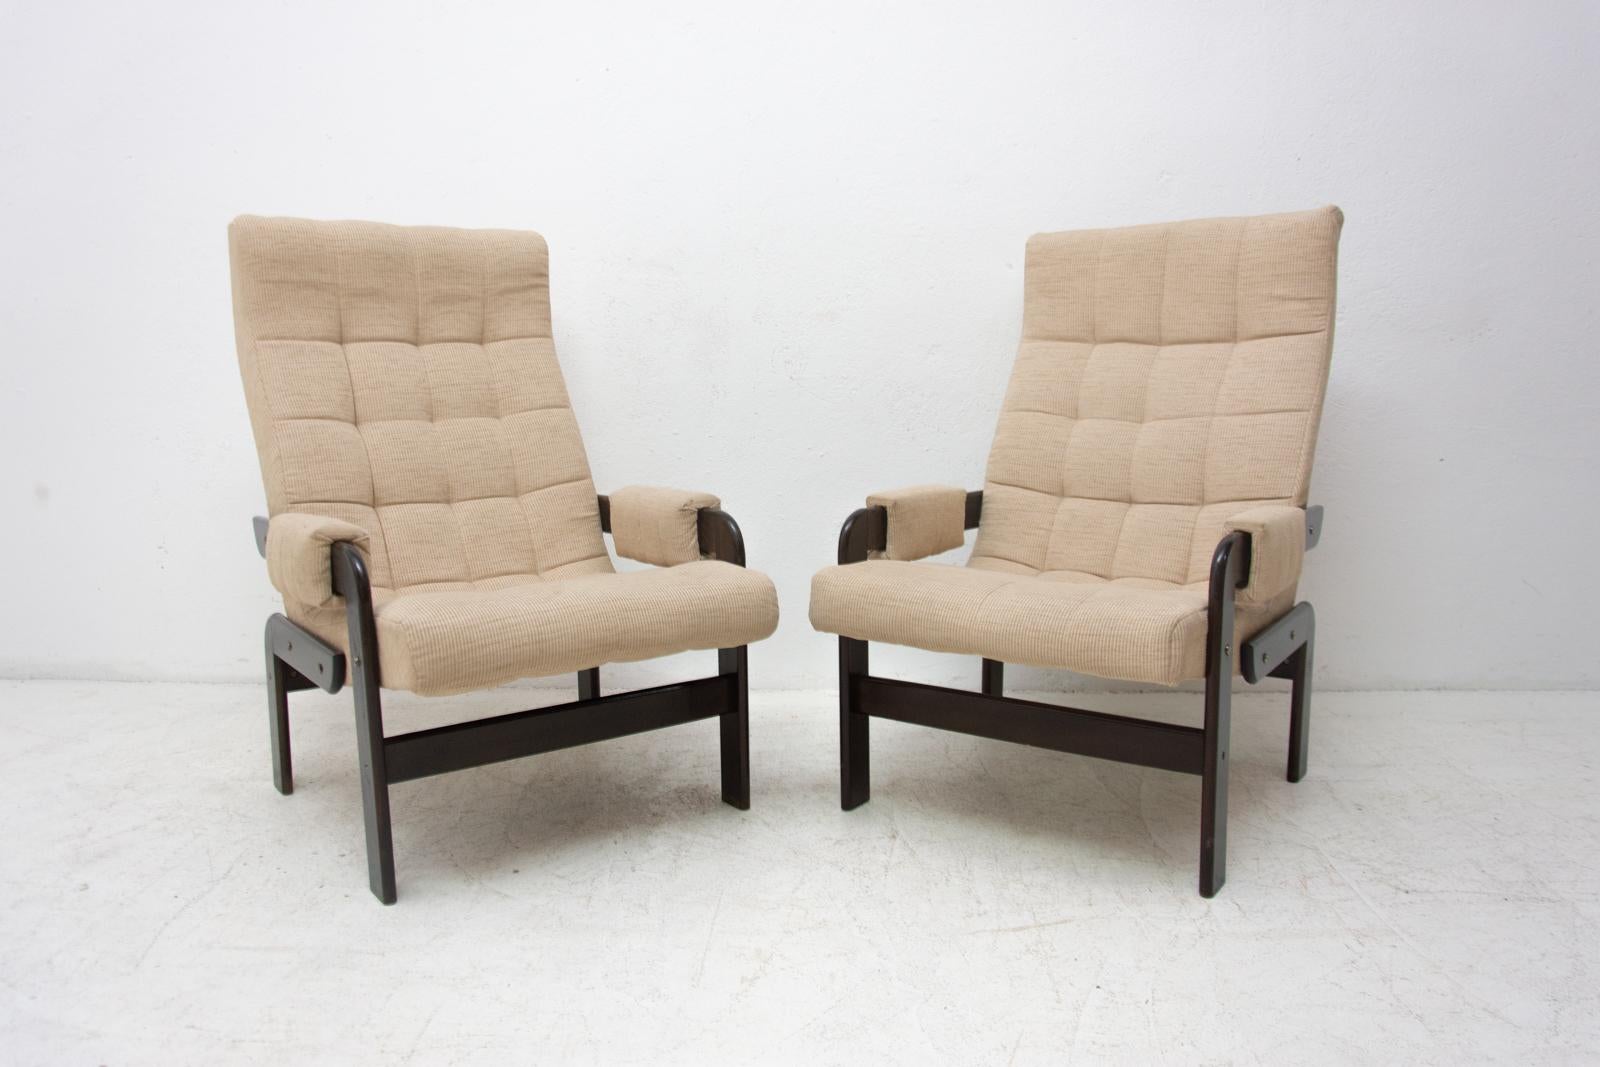 A pair of Vintage Scandinavian armchairs made in the 1970s. It has a beechwood structure and original upholstery in good Vintage condition. The chairs are fully functional in very good condition, very nice design retro chic. Price is for the pair.